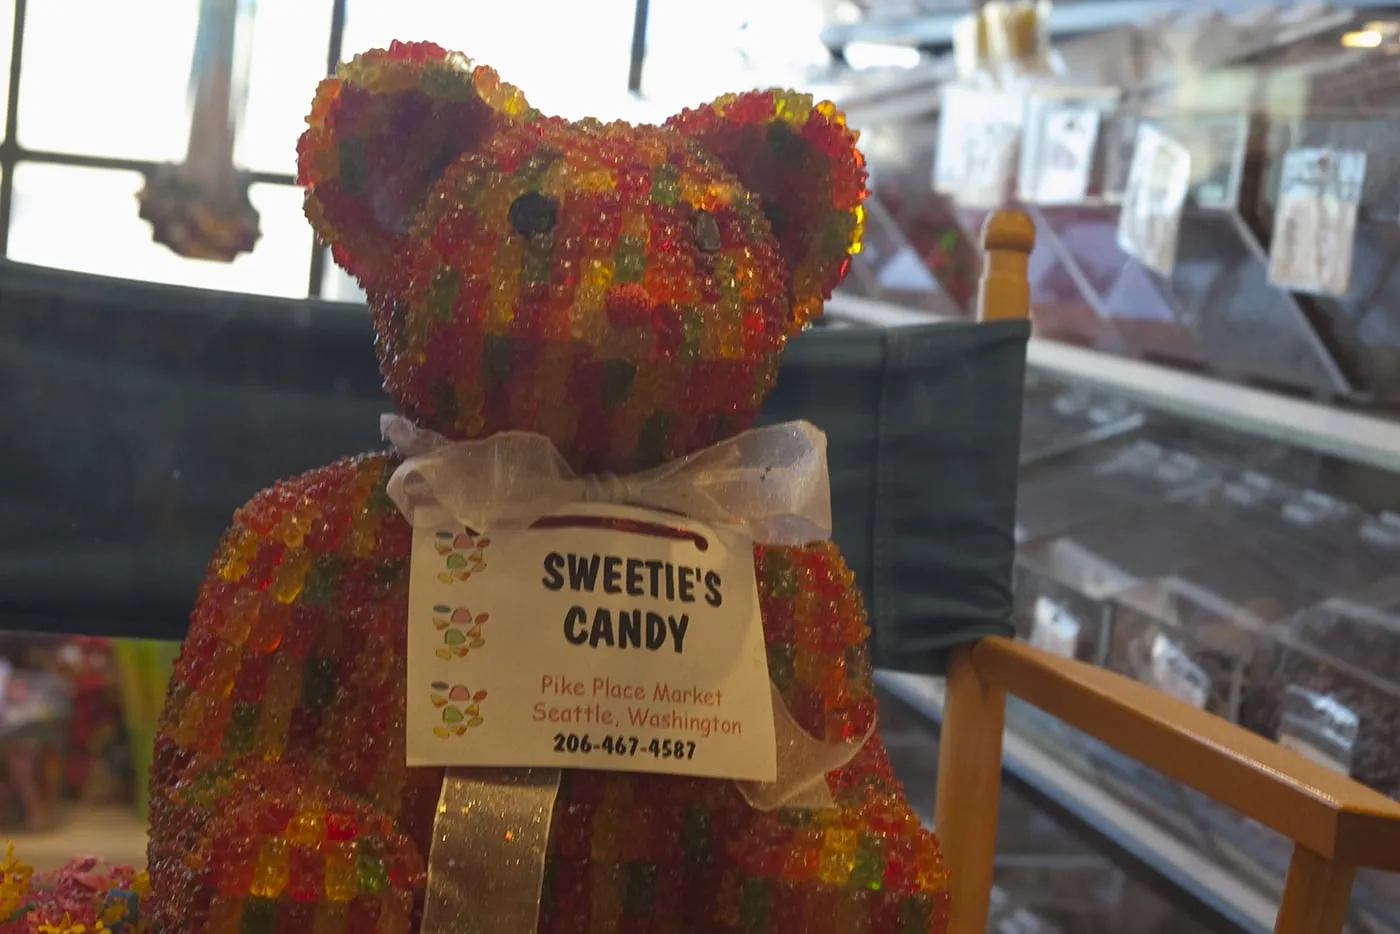 Giant Gummy Bear made from Gummy Bears at Sweetie's Candy in Pike Place Market in Seattle, Washington.